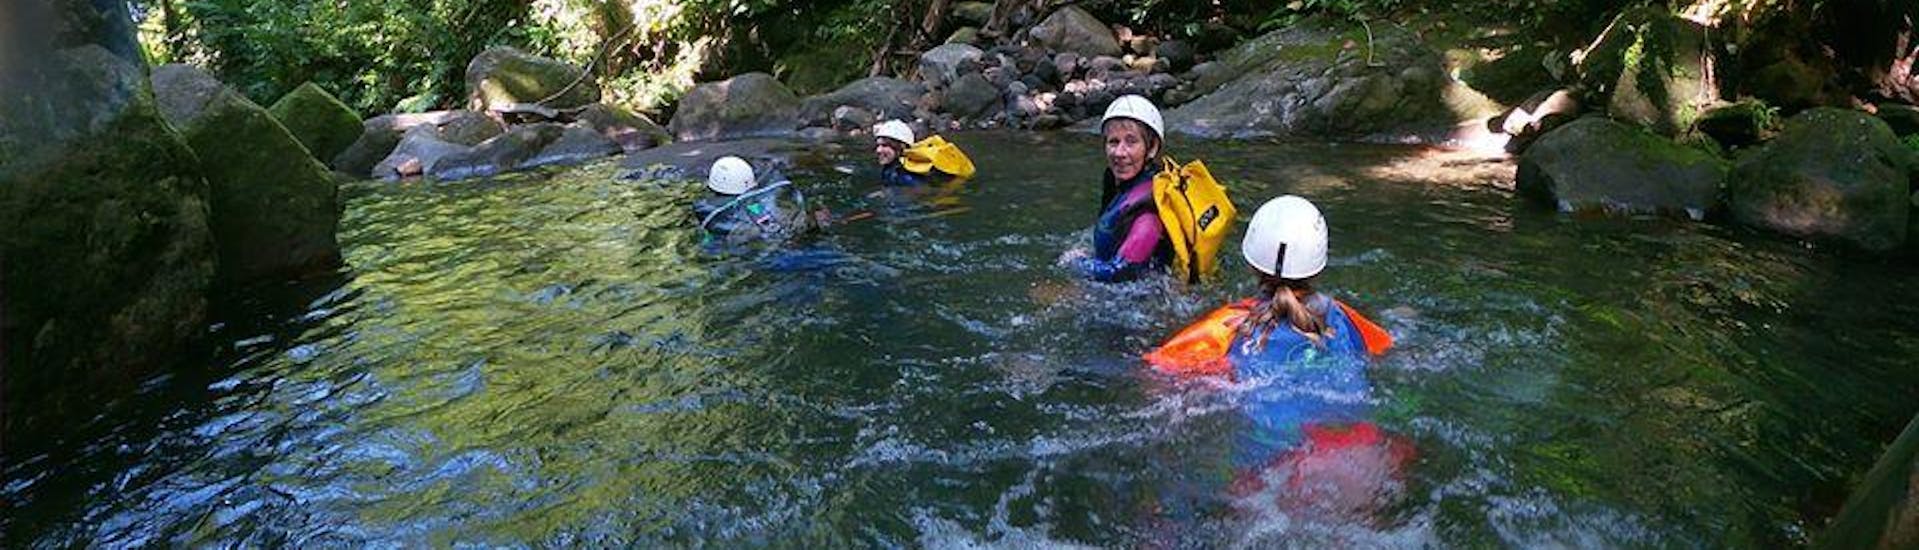 Sportliche Canyoning-Tour in Saint-Claude.